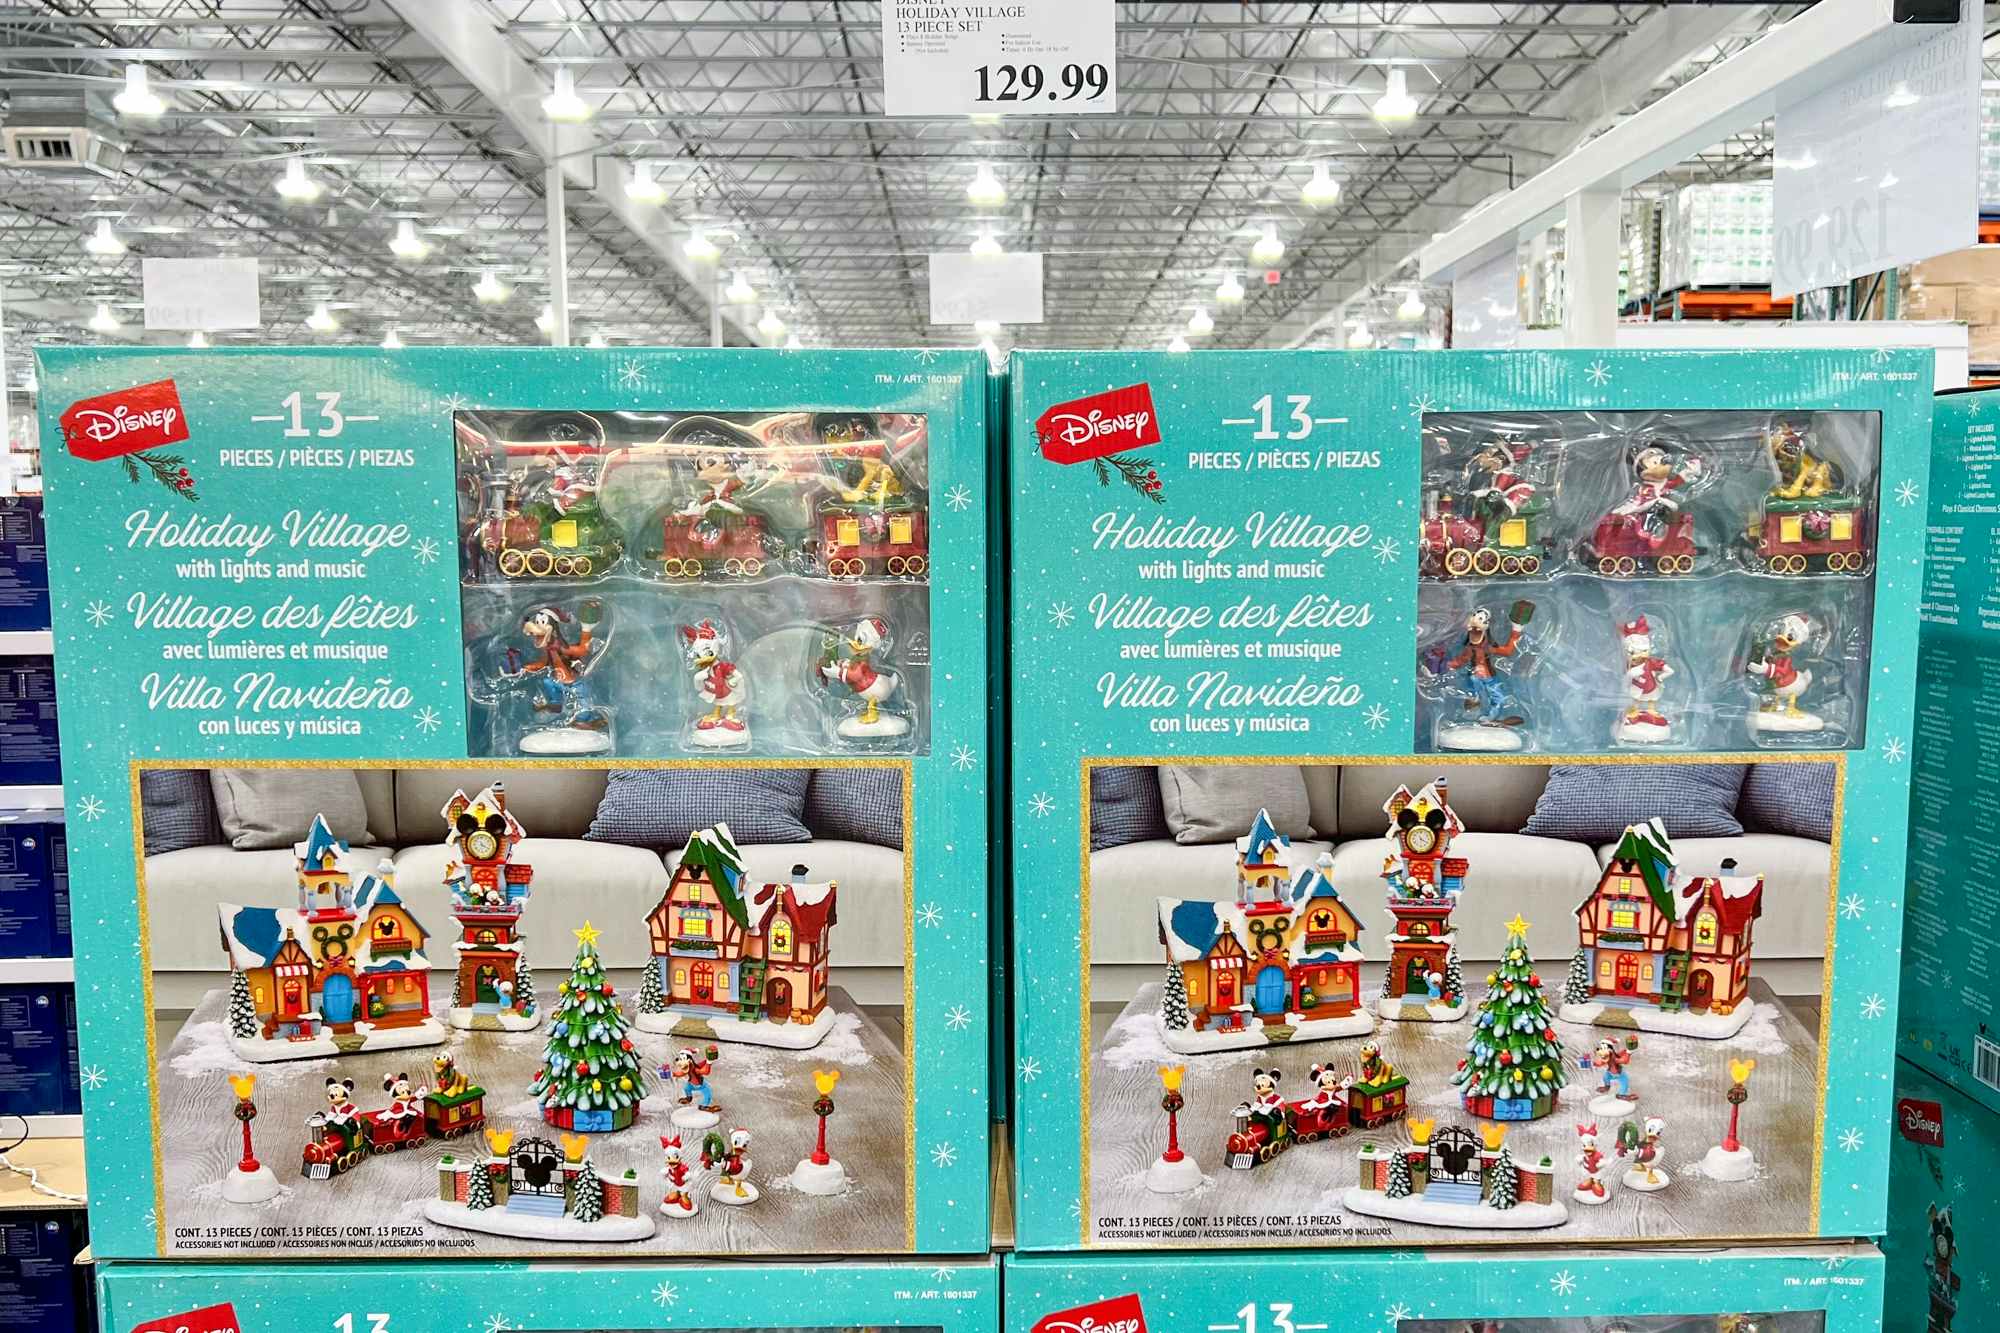 Disney holiday village sets for sale at Costco